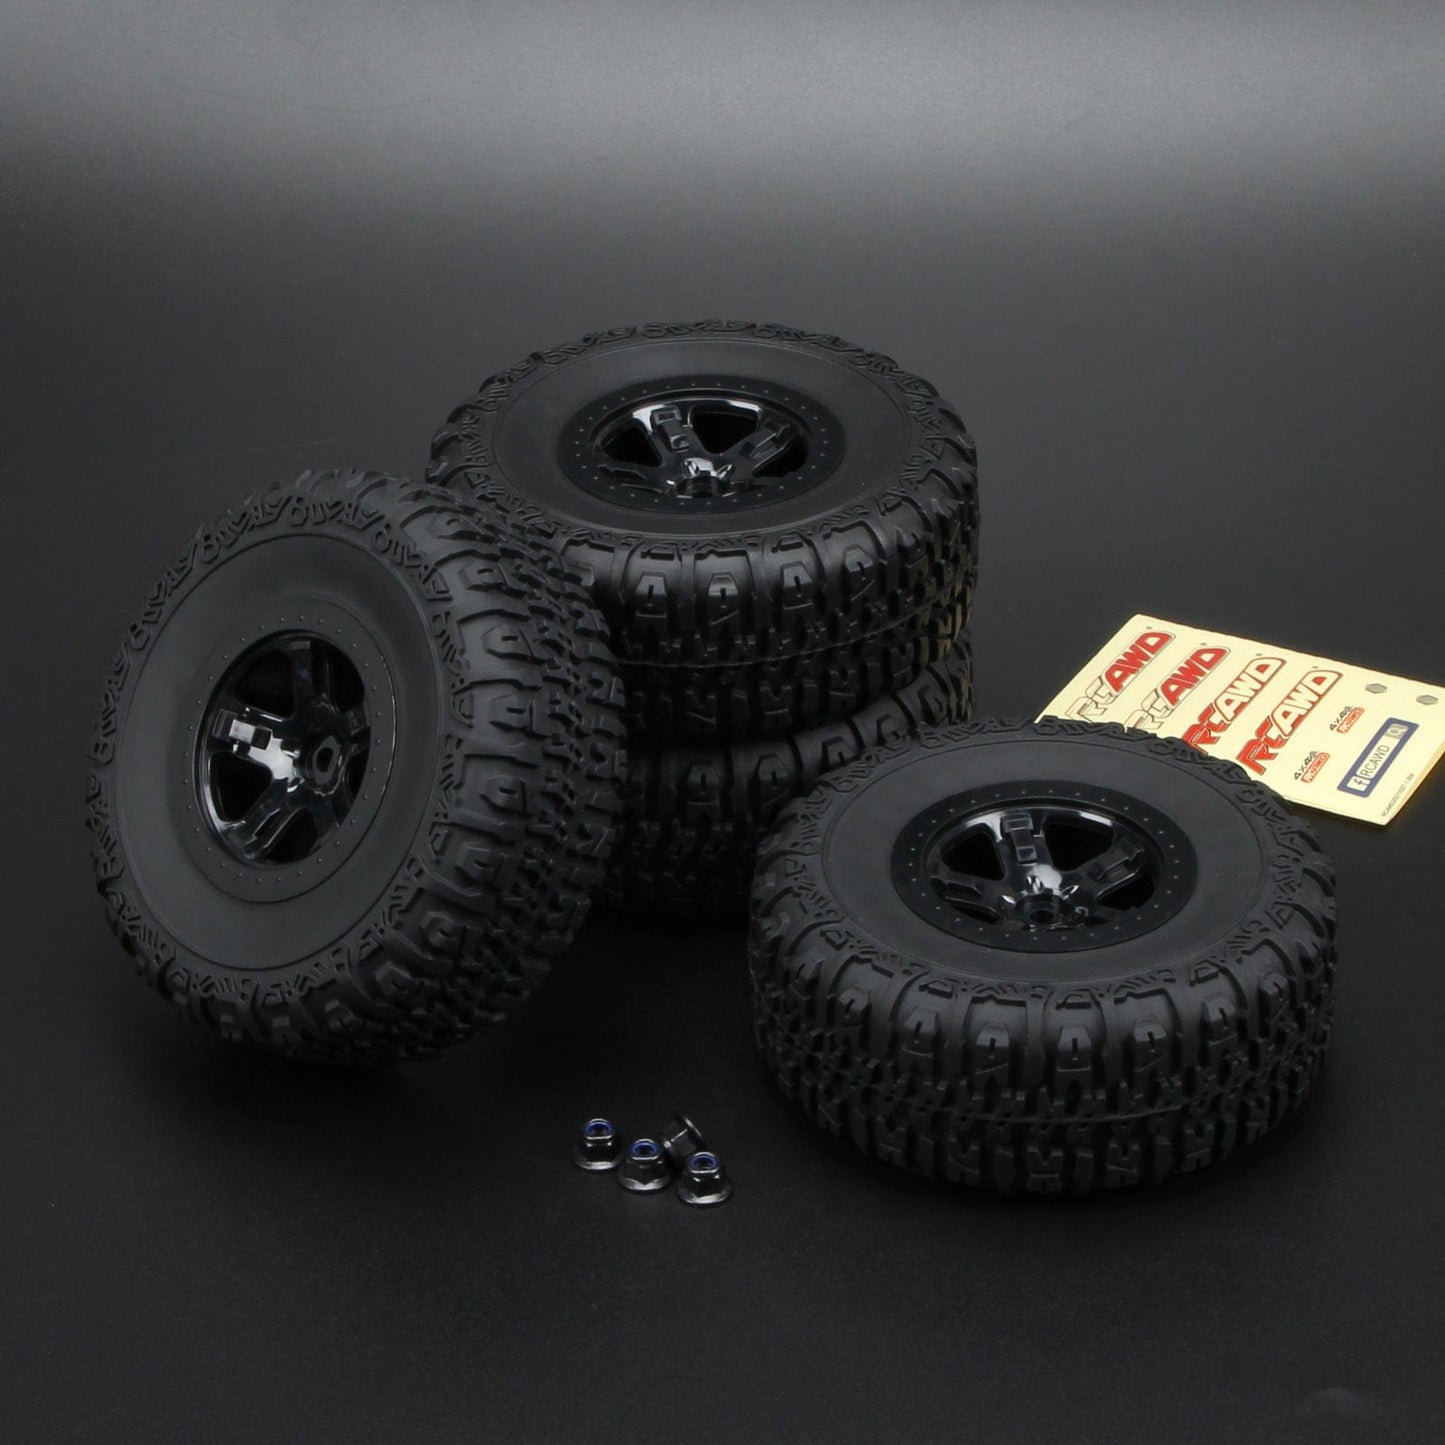 RCAWD LOSI Baja Rey 4WD # Pattern Tires RCAWD Losi Baja Rey 4WD Upgrades Alpine Front/Rear 2.2/3.0 Pre-Mounted 5 Spokes Tires